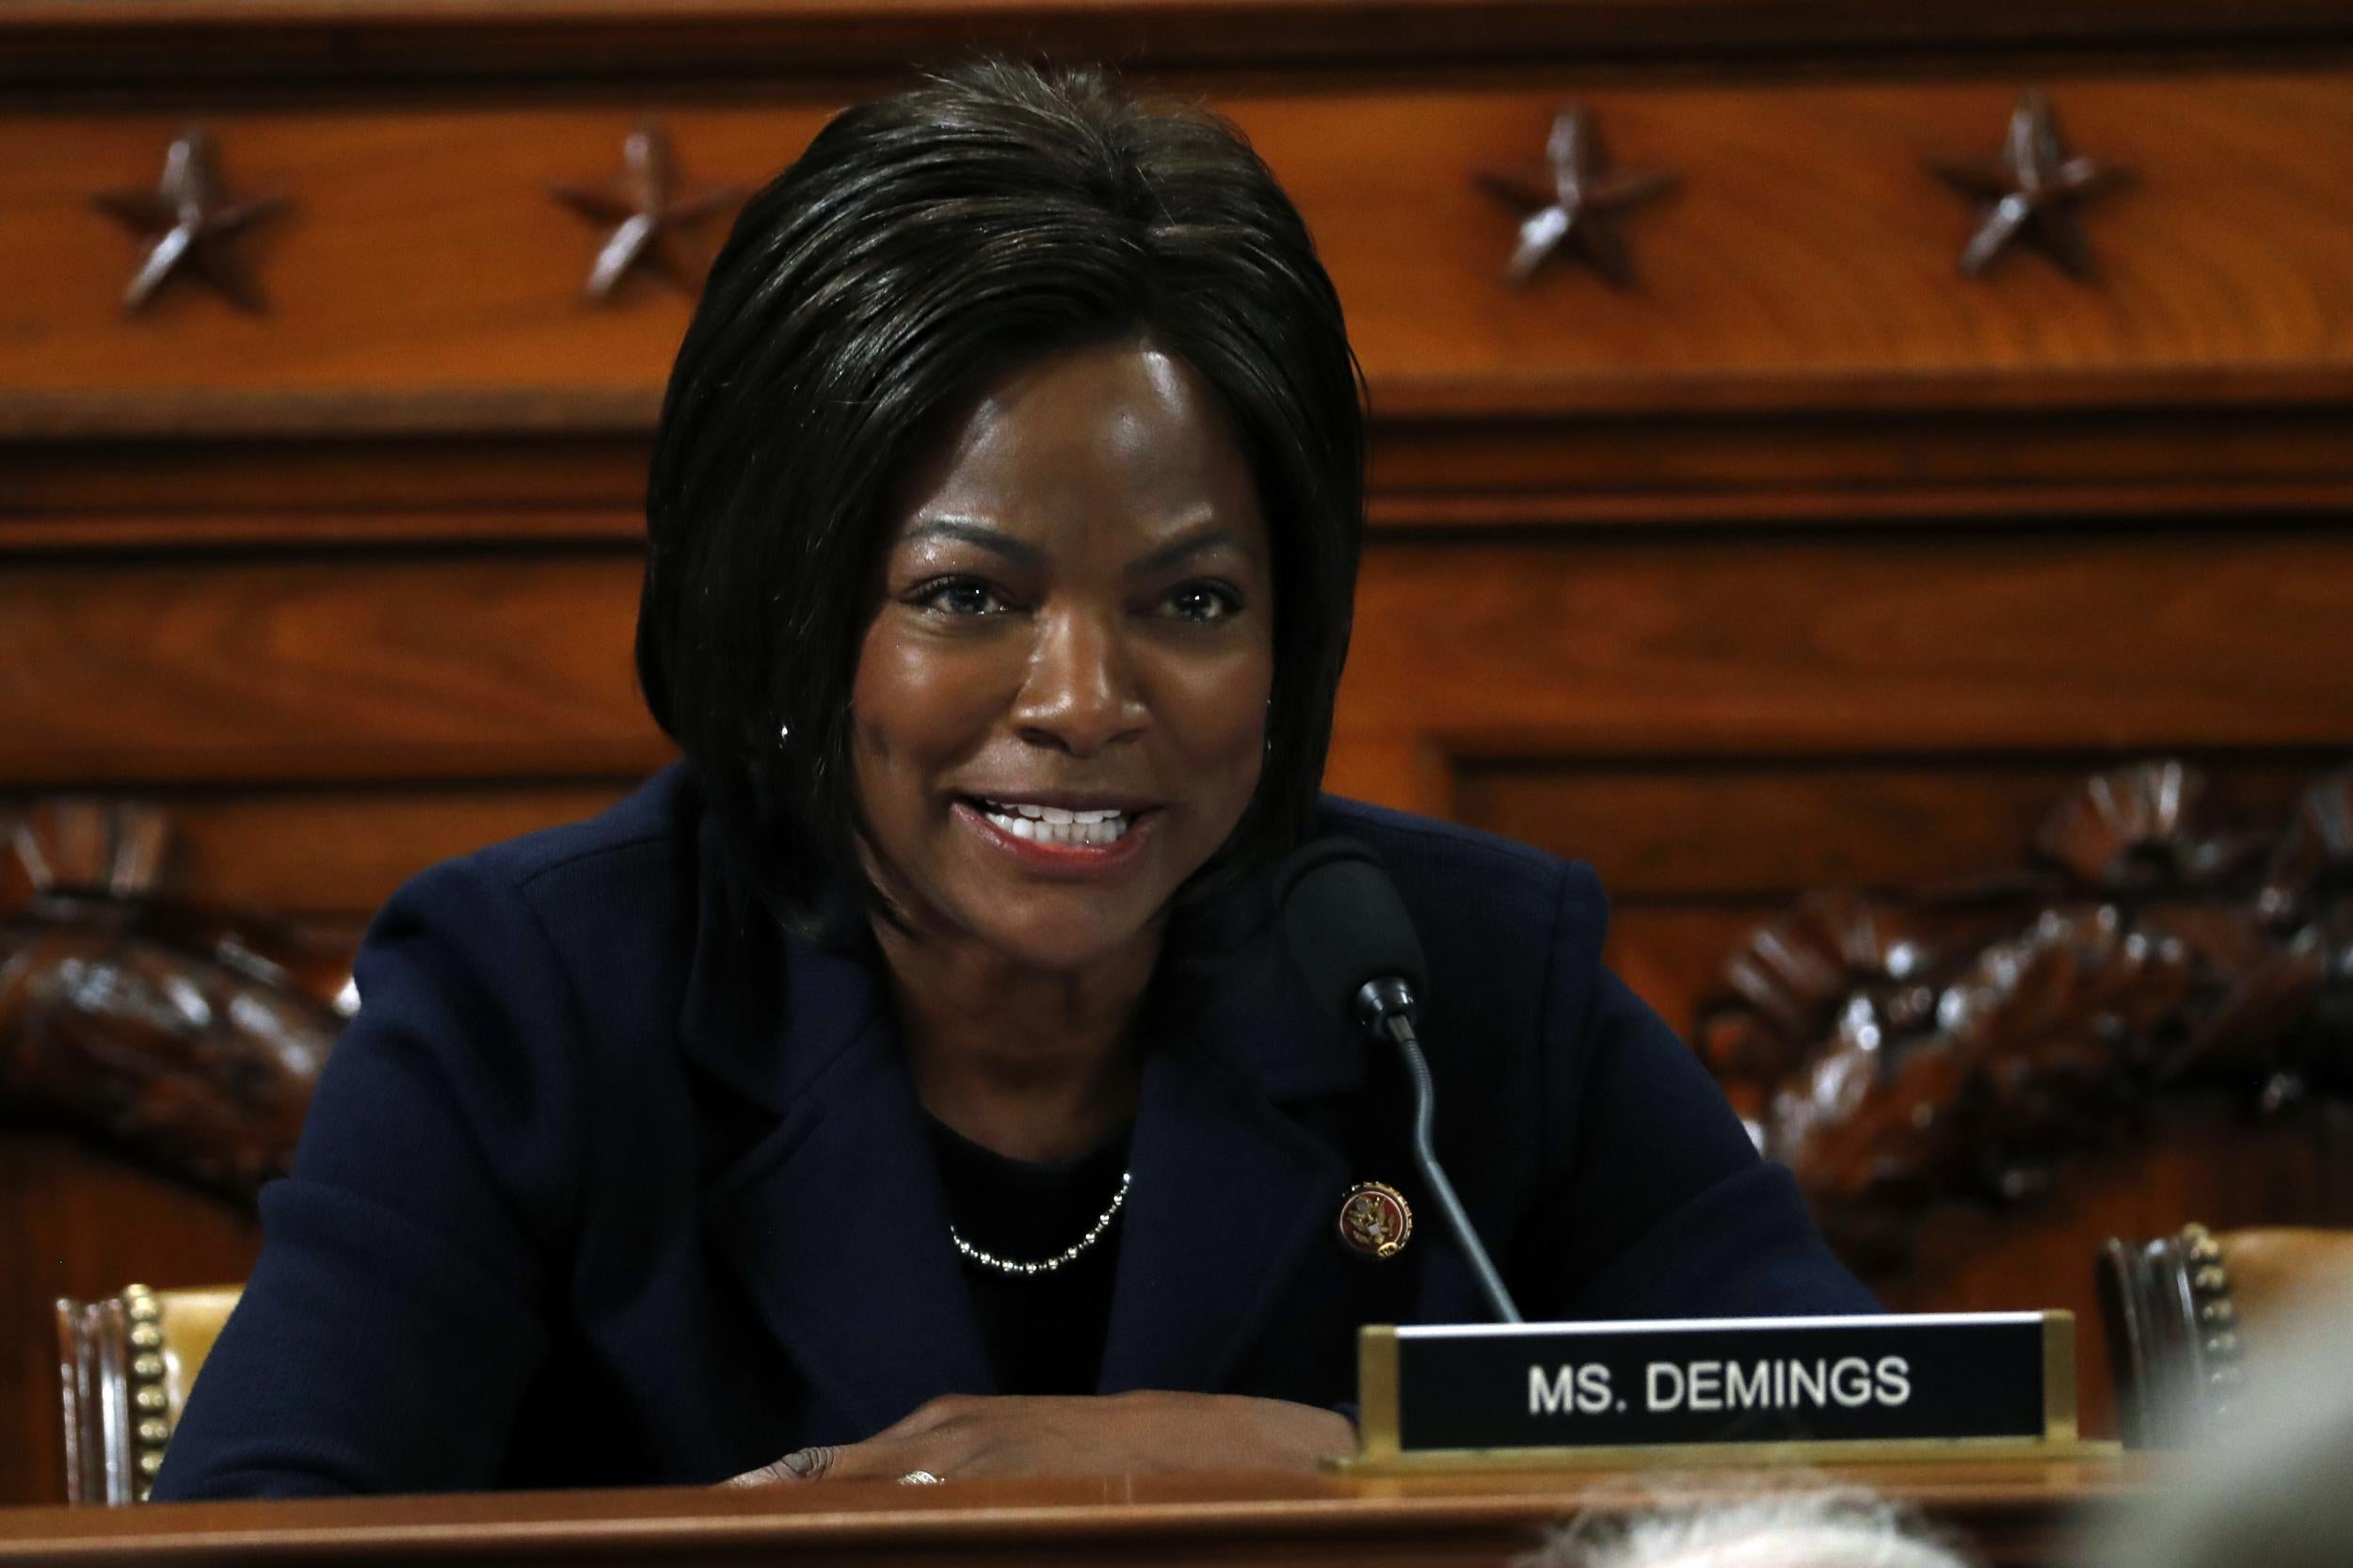 Val Demings served as police chief of Orlando before entering politics